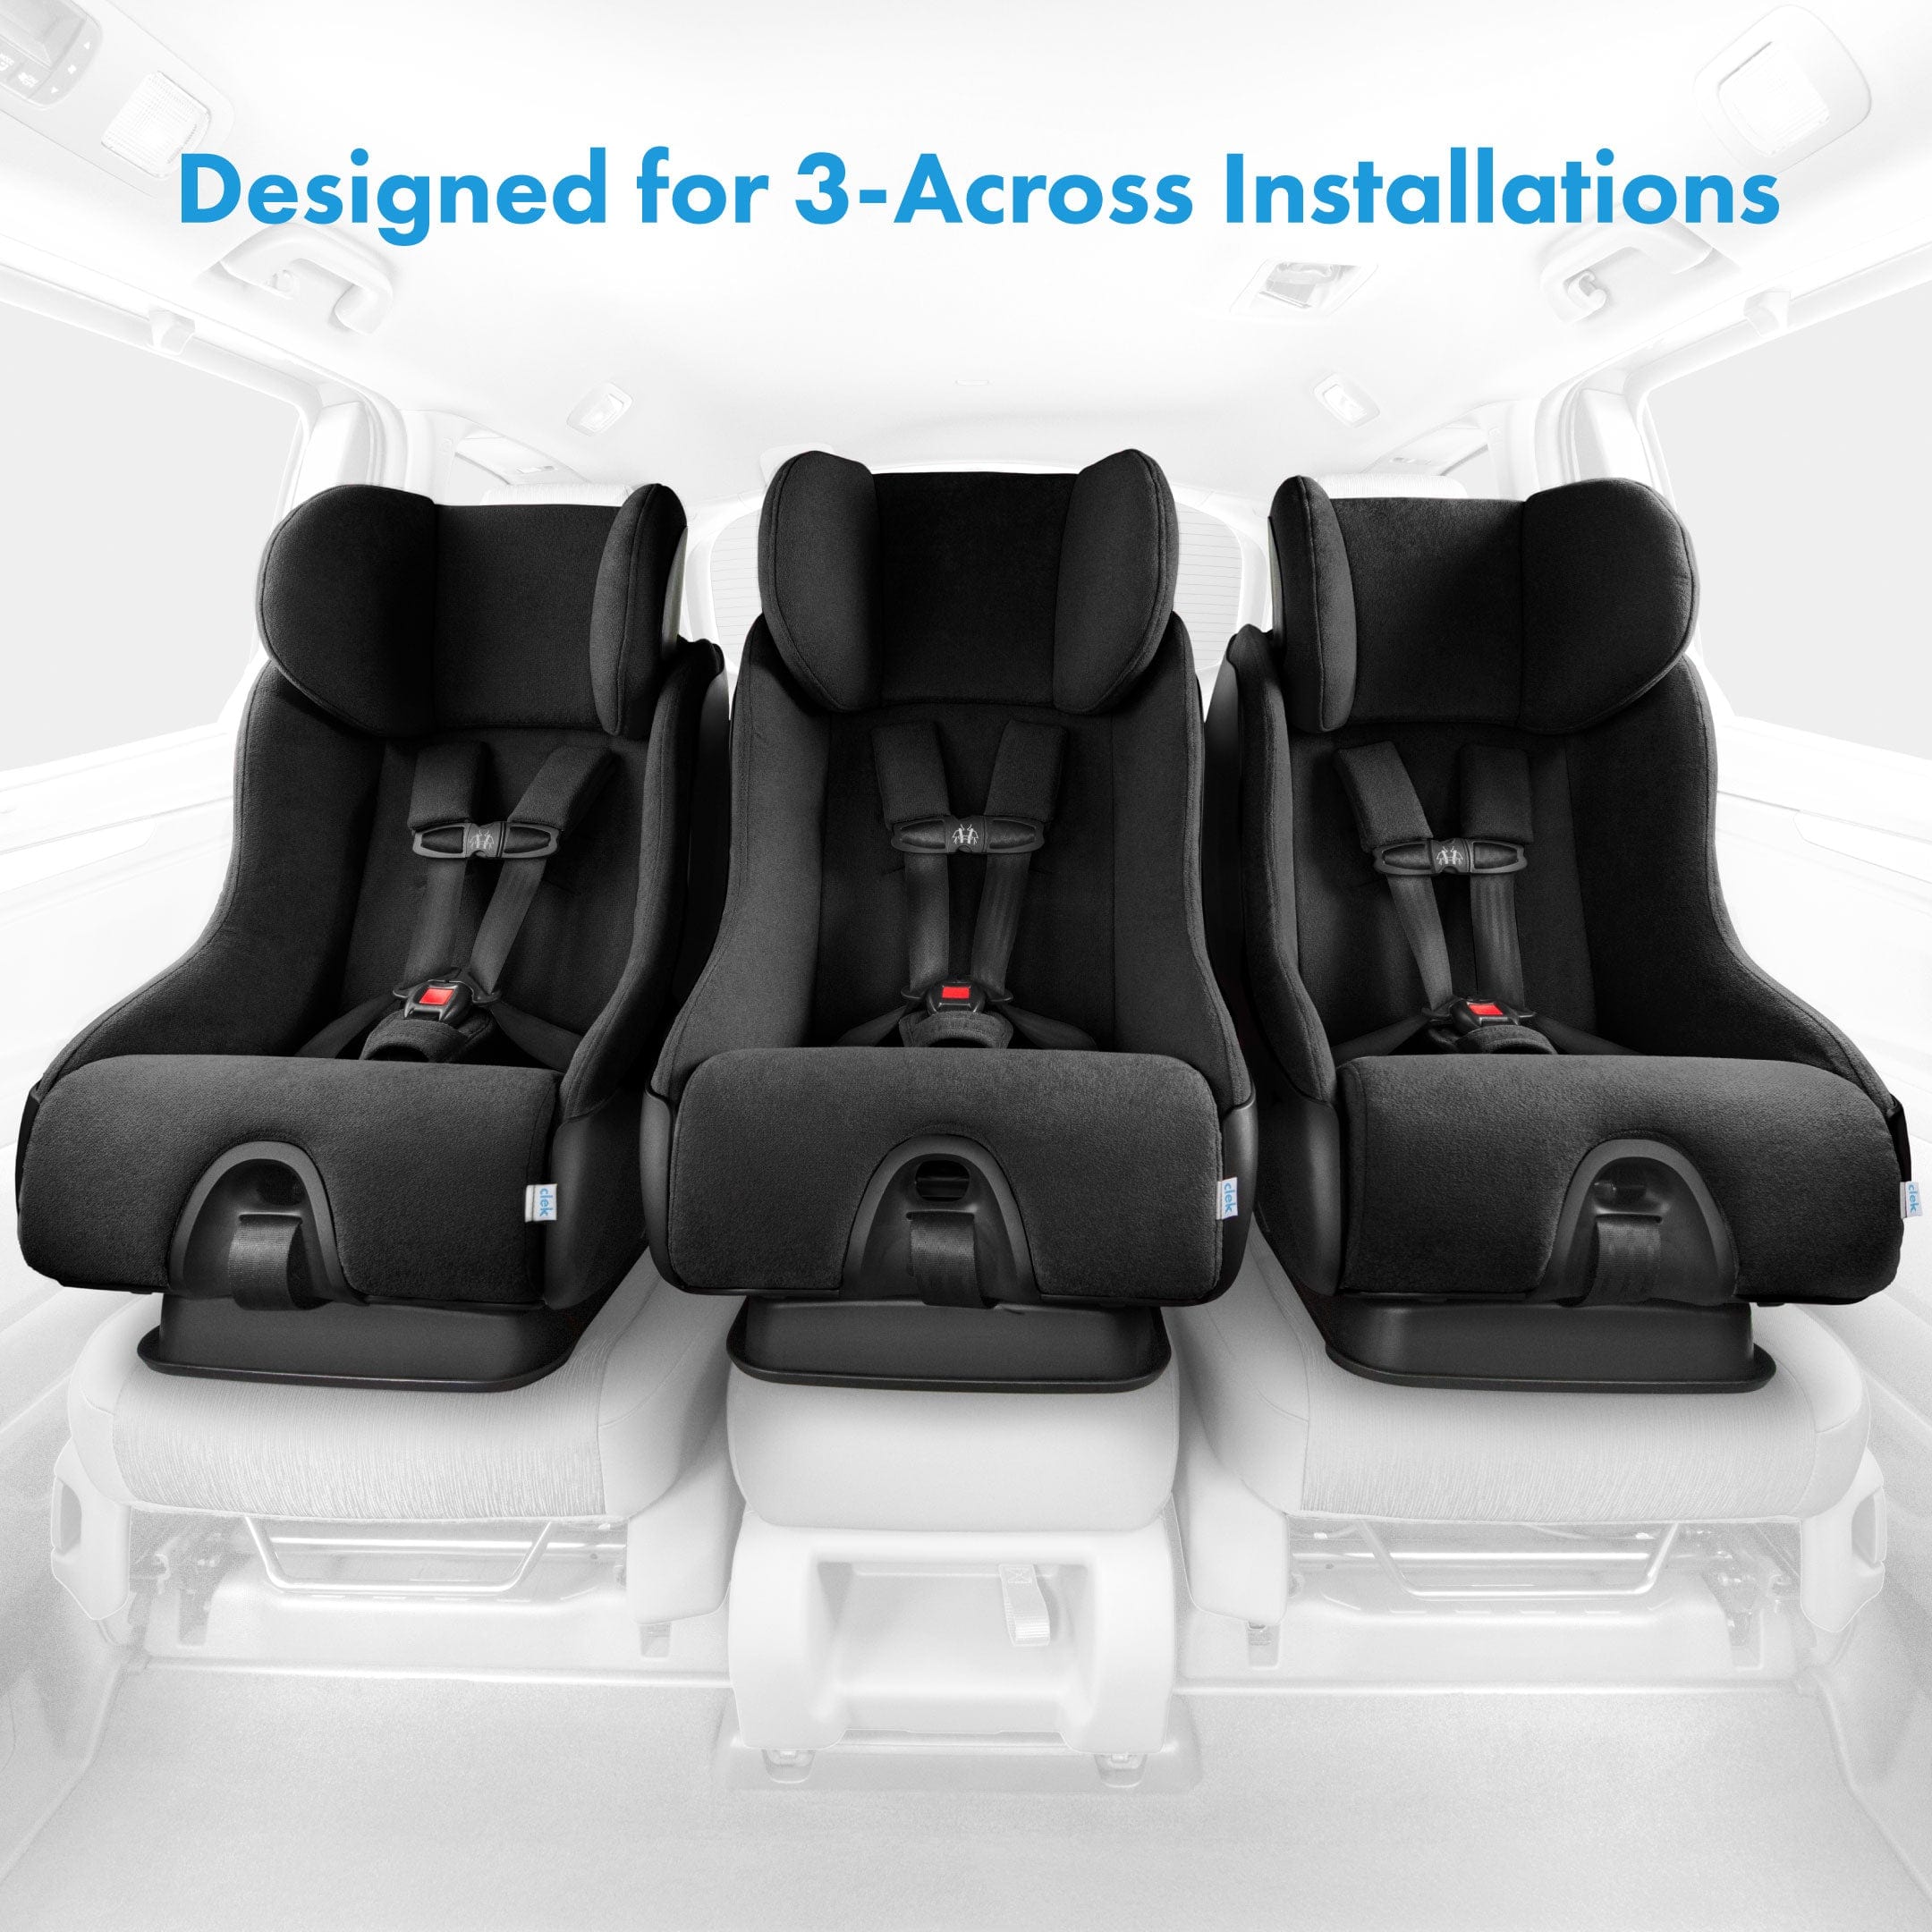 Clek Convertible Seat fllo all-groups